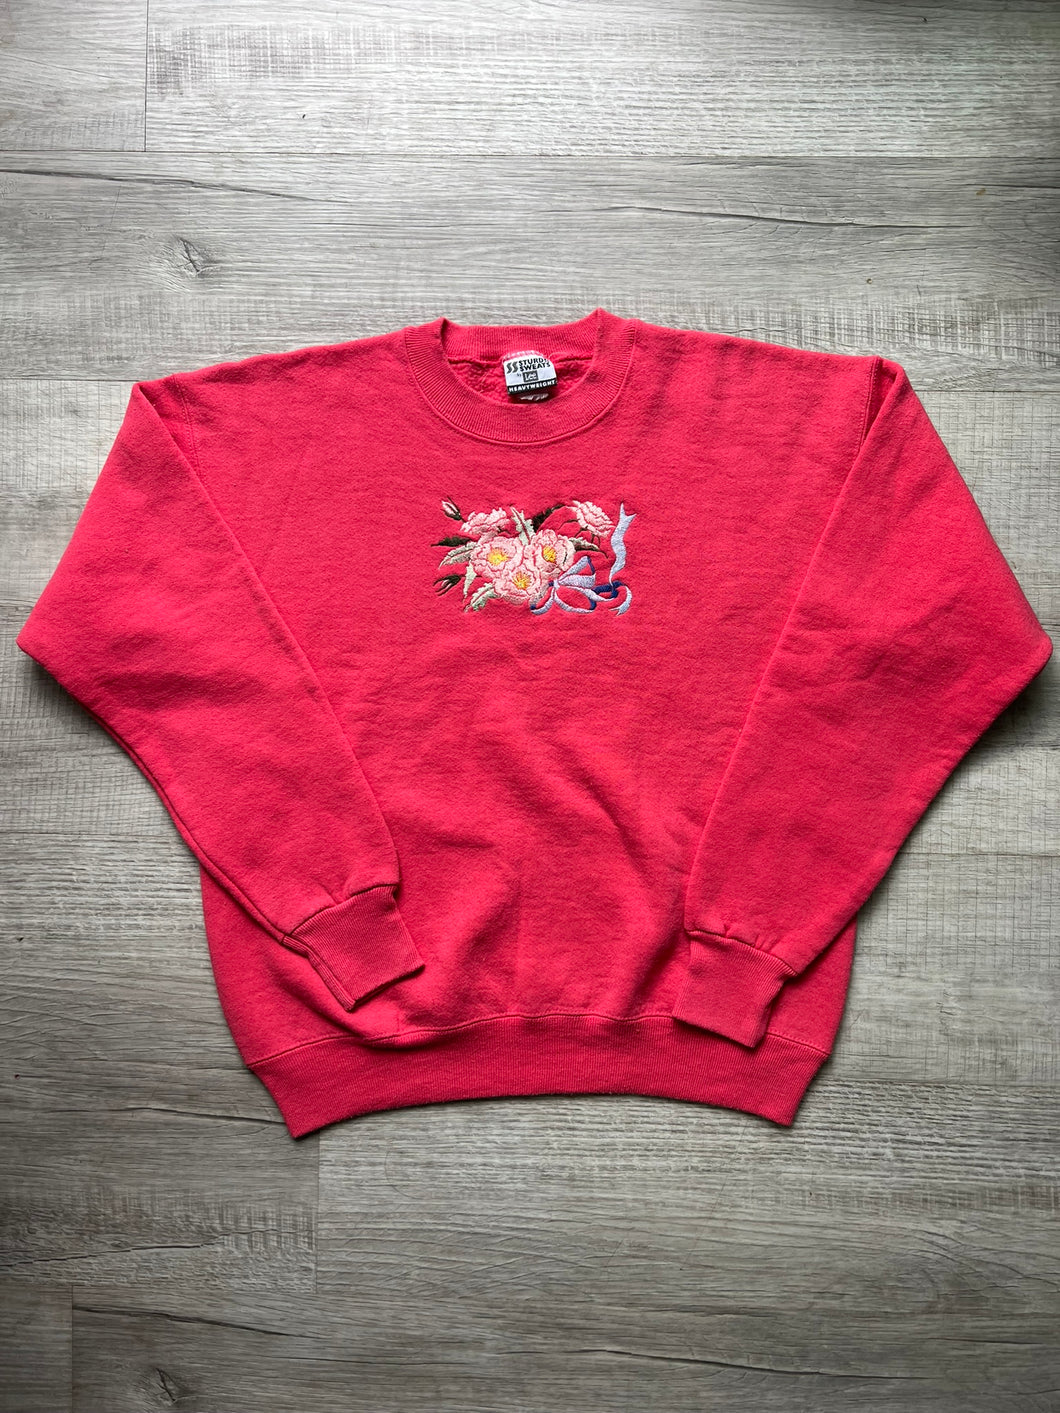 90s Vintage Pink Flower Embroidered Graphic Crewneck Sweater